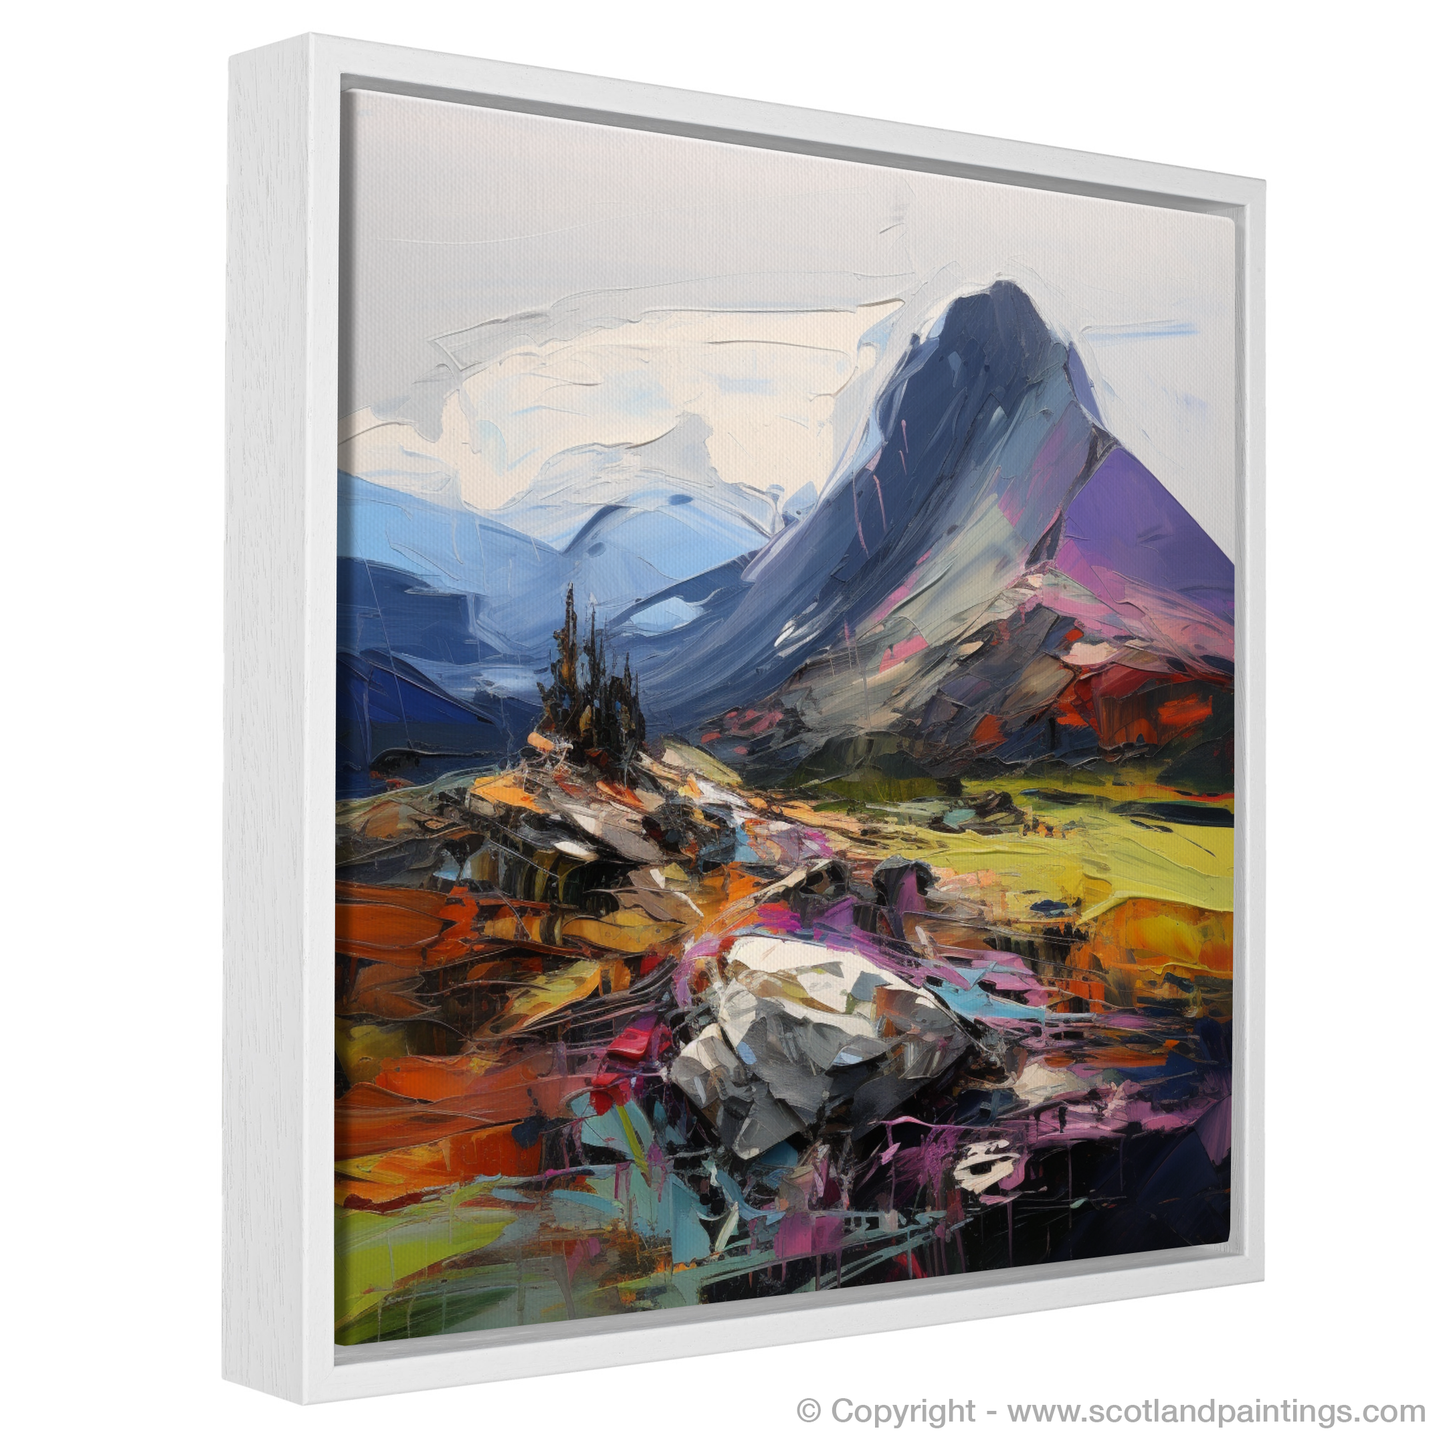 Painting and Art Print of Cairn Gorm, Highlands entitled "Cairn Gorm Unleashed: An Expressionist Ode to the Scottish Highlands".